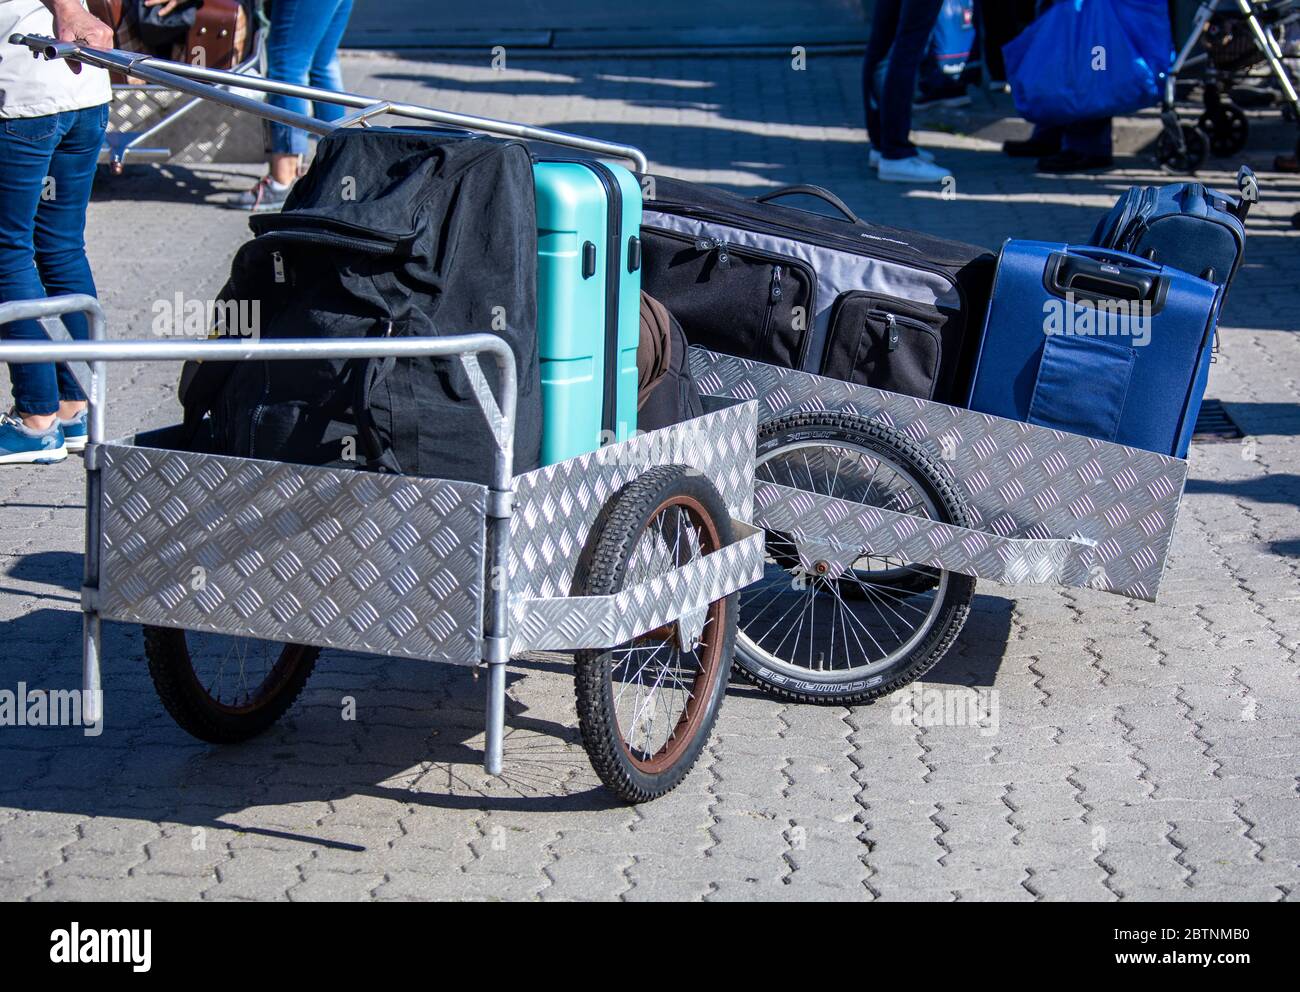 Vitte, Germany. 25th May, 2020. Holidaymakers load their luggage onto hand carts in front of the ferry "Vitte" in the harbour on the Baltic island of Hiddensee. The first holidaymakers return to the Baltic Sea after the lifting of the Corona travel ban. Credit: Jens Büttner/dpa-Zentralbild/ZB/dpa/Alamy Live News Stock Photo